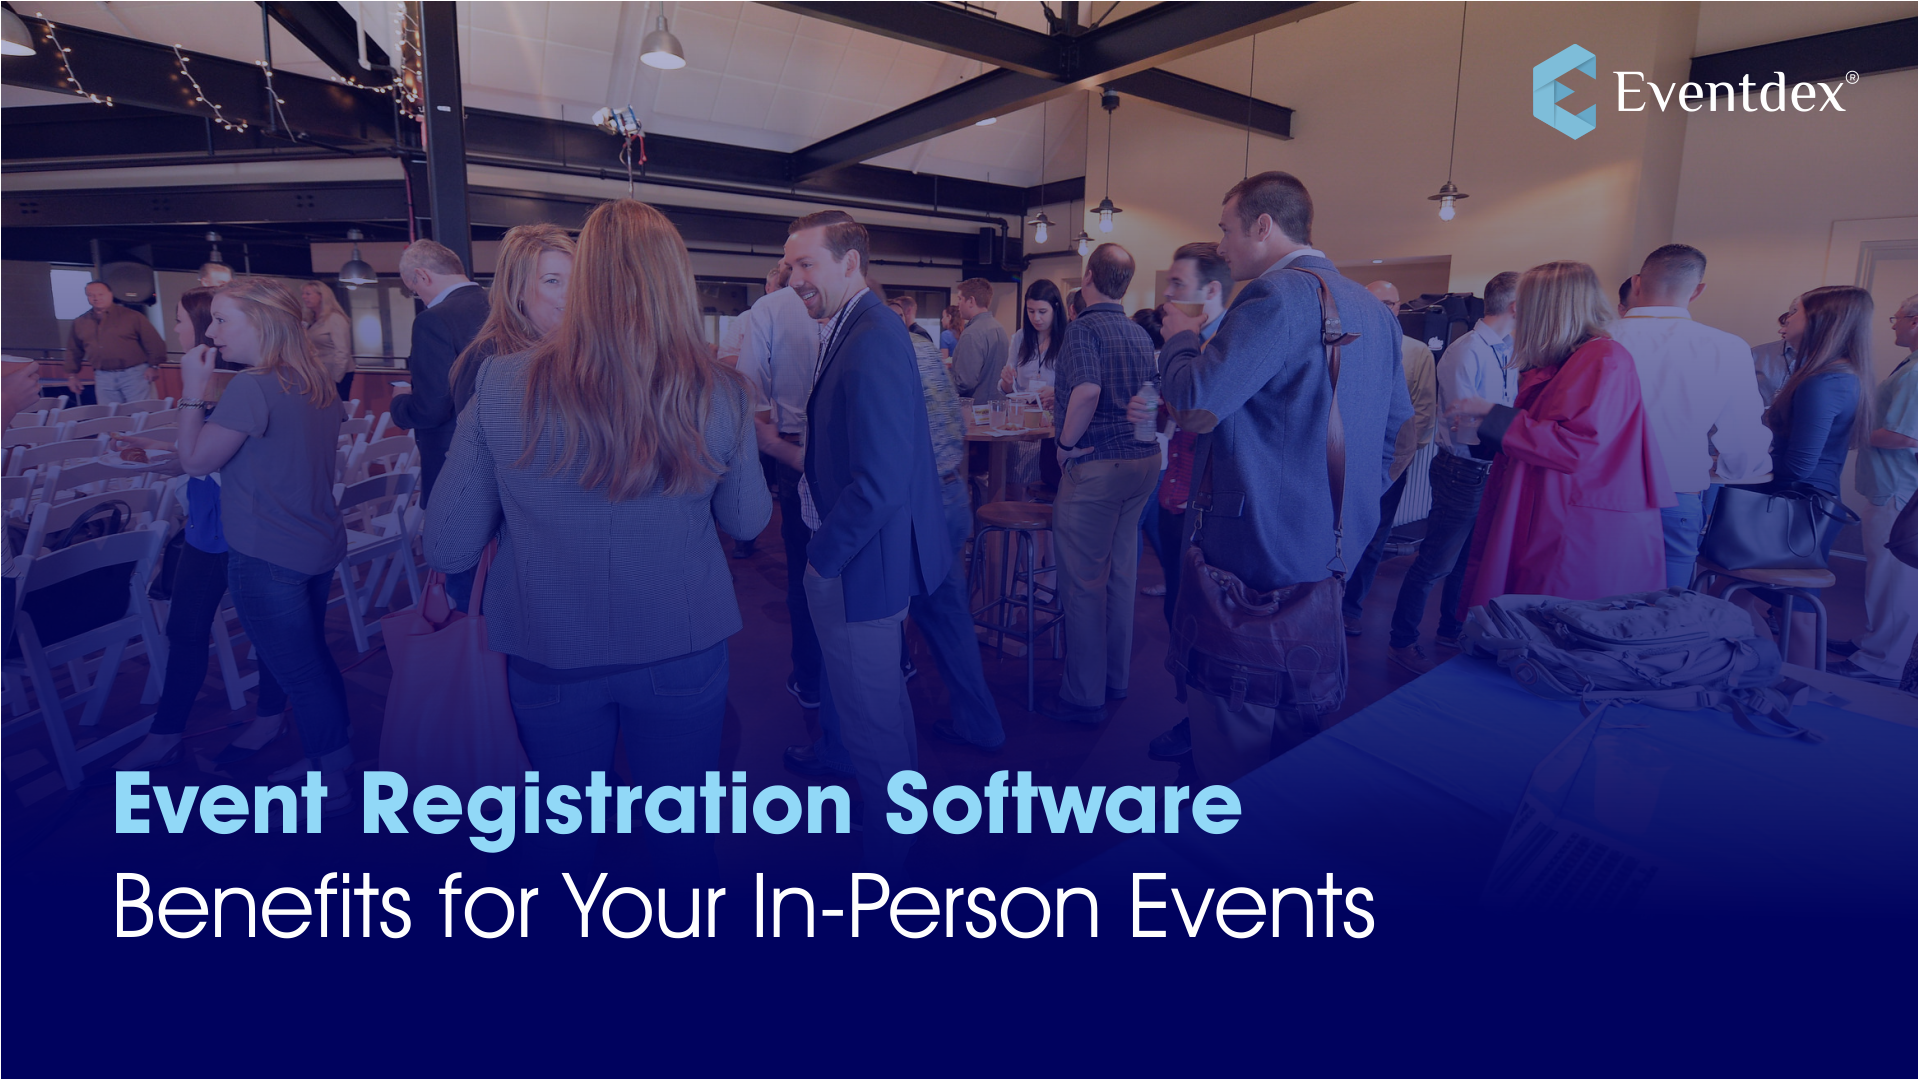 in-person events